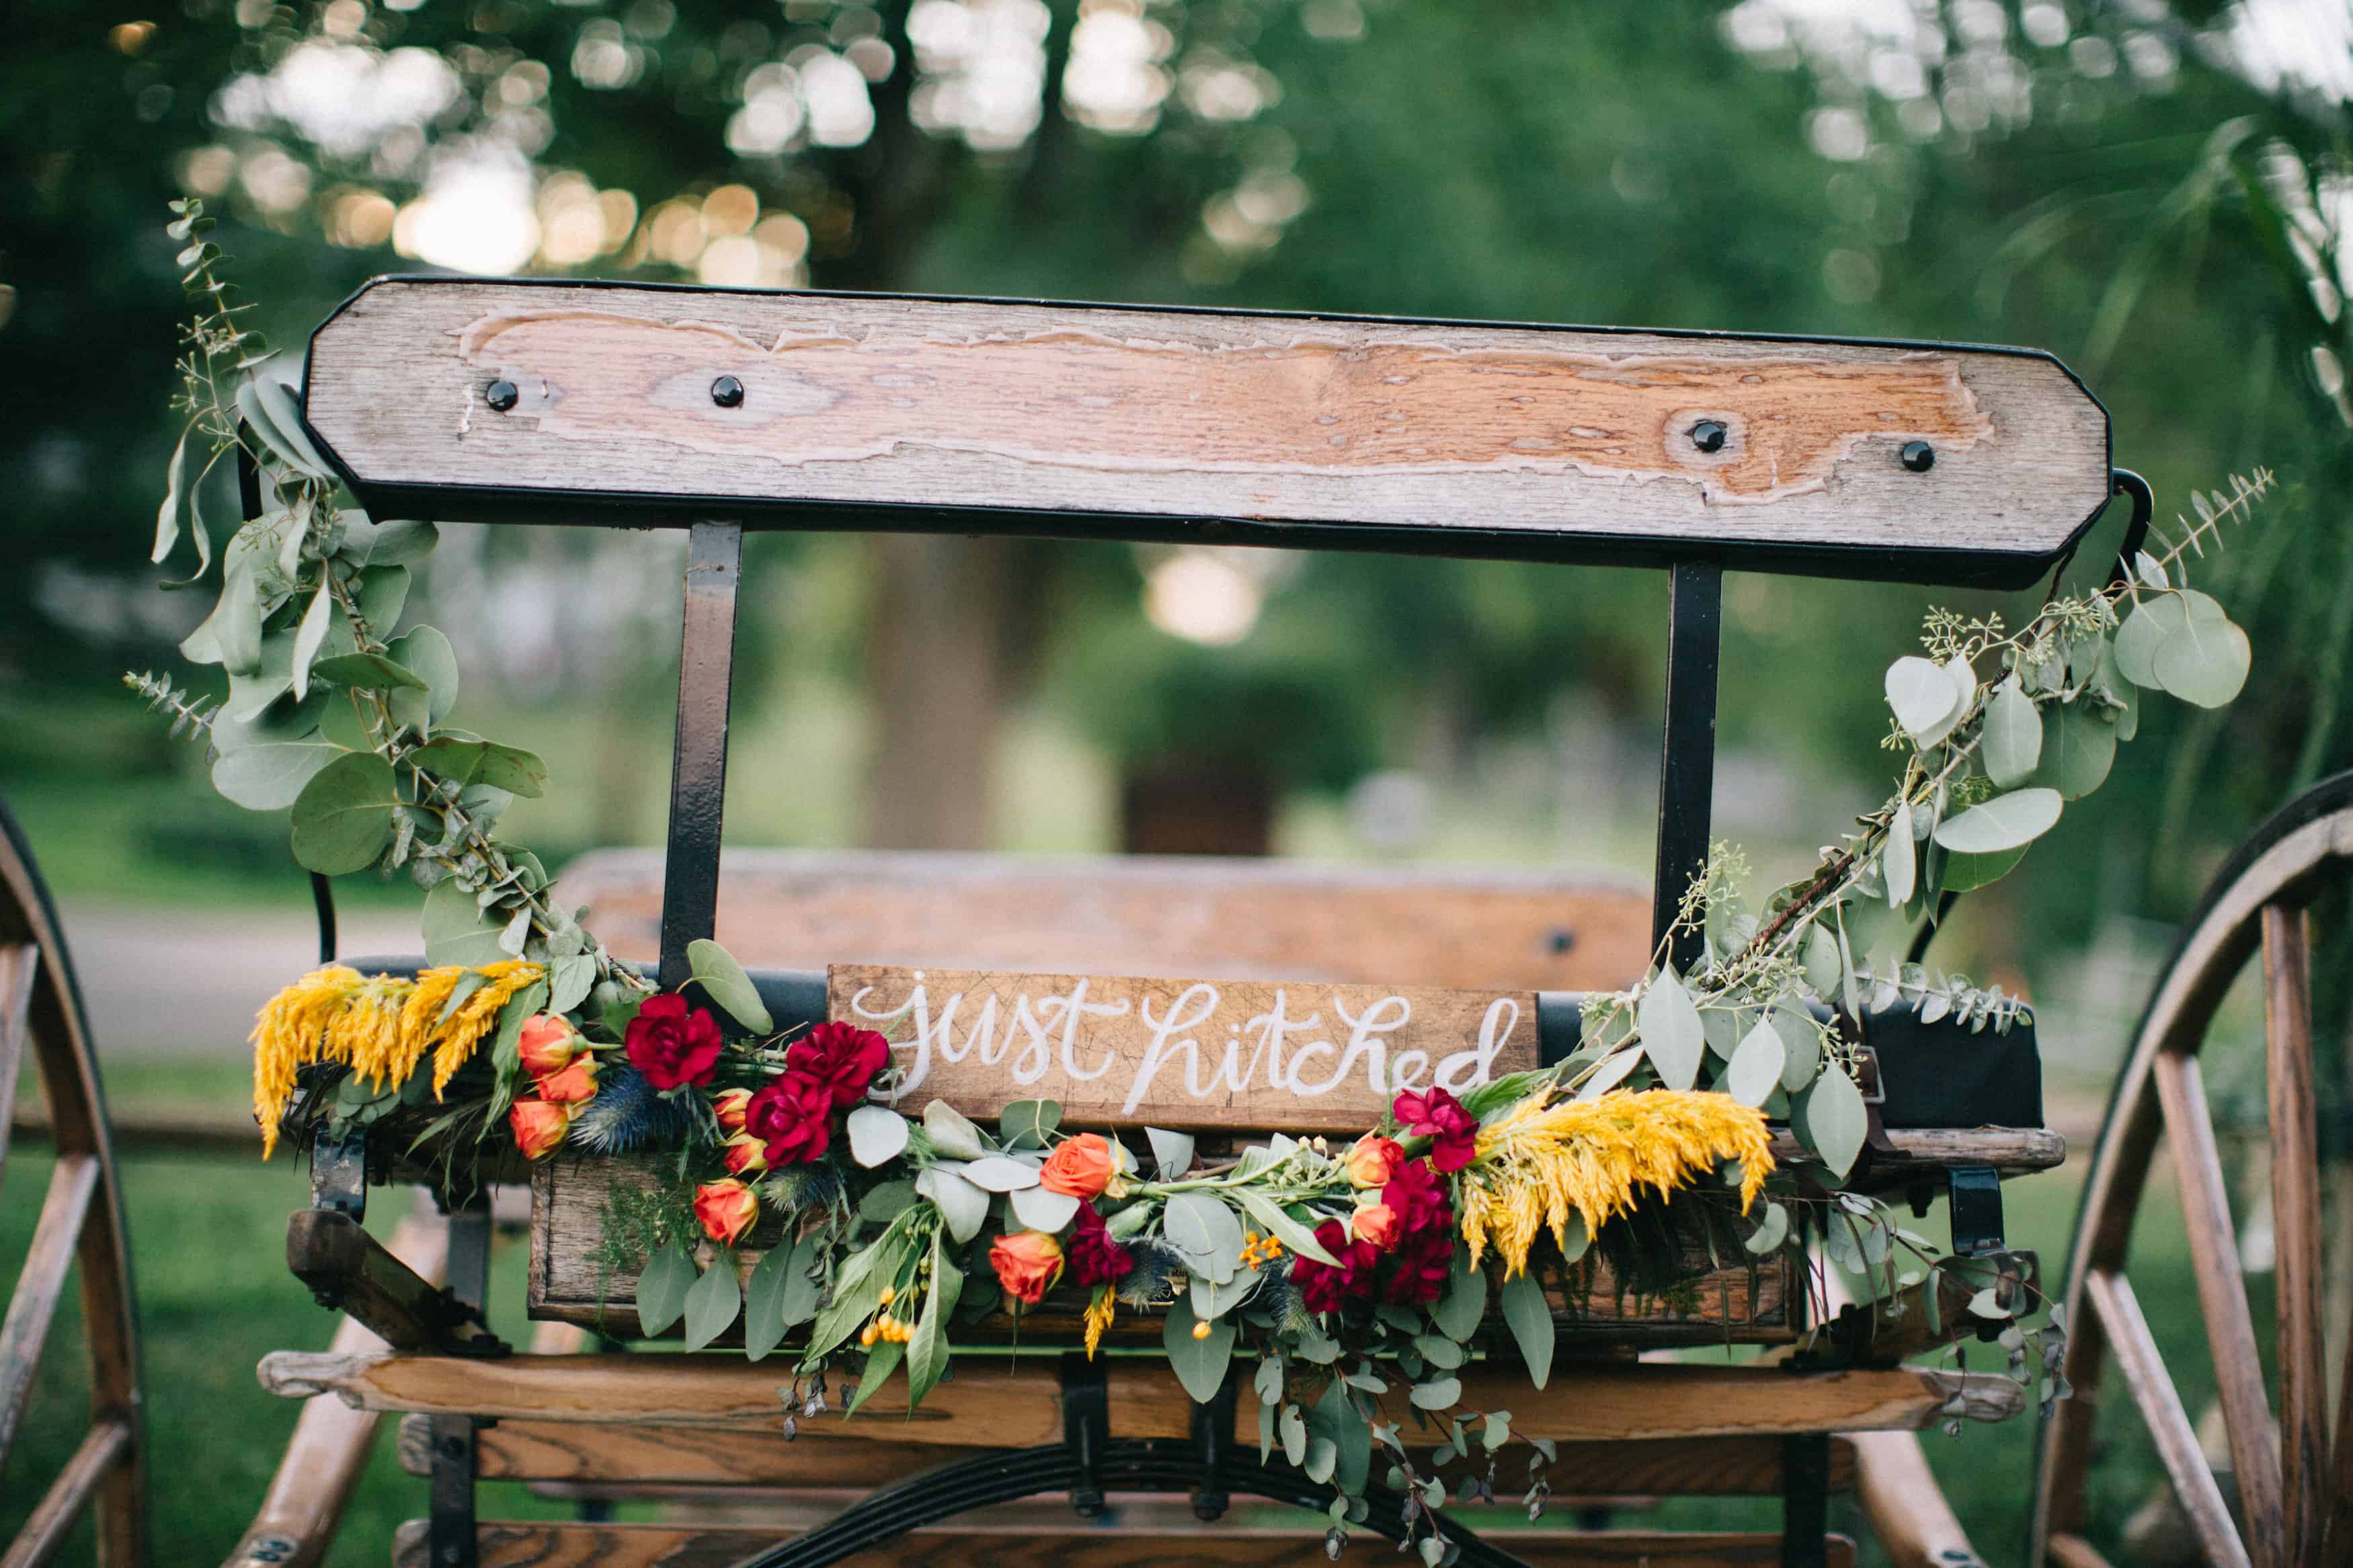 Vintage Beauty & Rustic Charm: An Equestrian Inspired Wedding